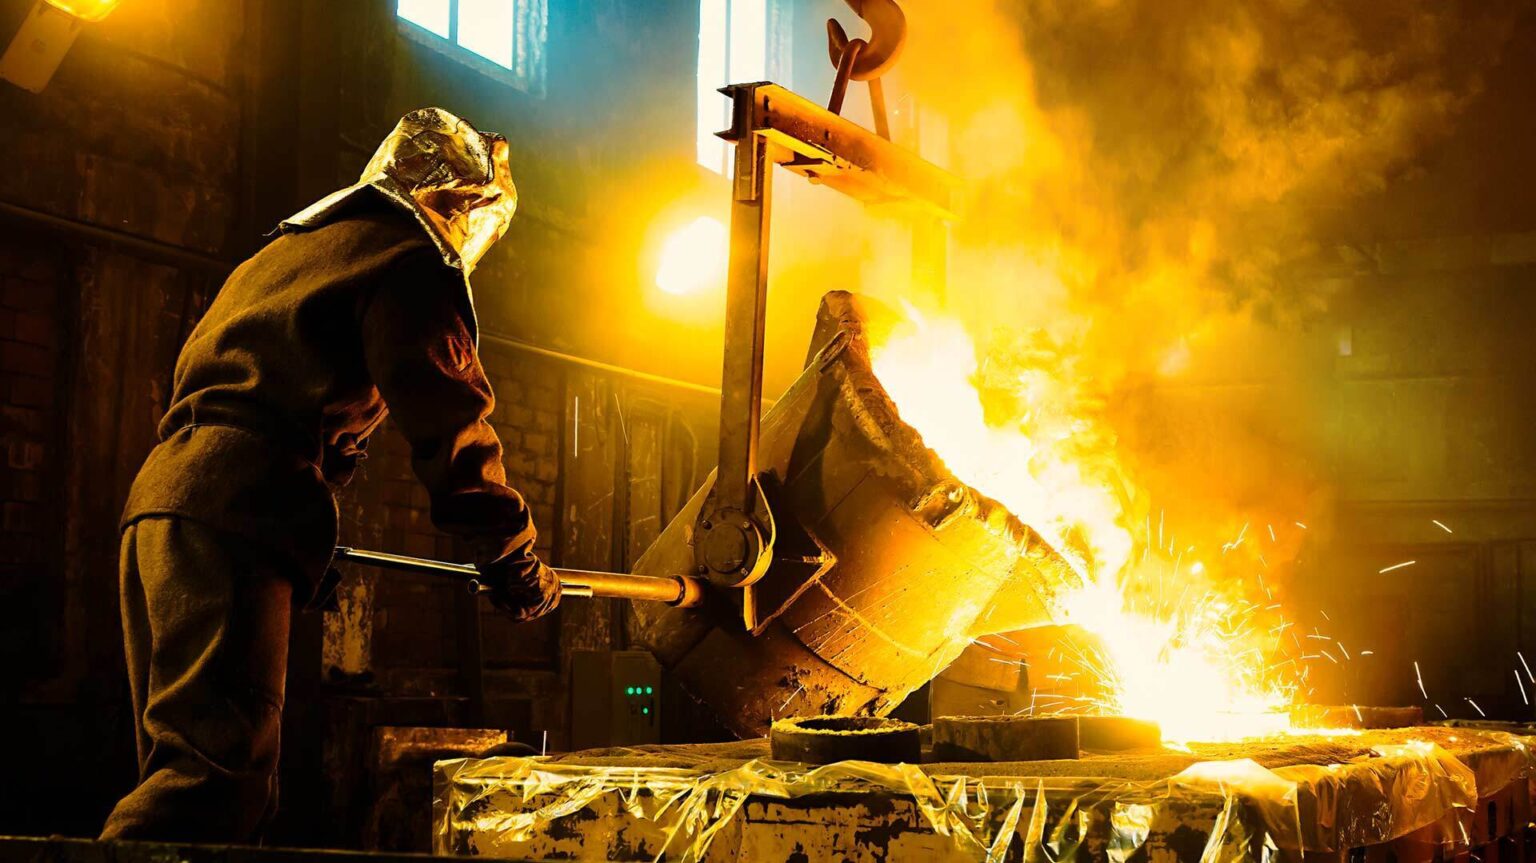 A steel worker wearing protective clothing guides the pouring of a vat of molten metal inot a container.